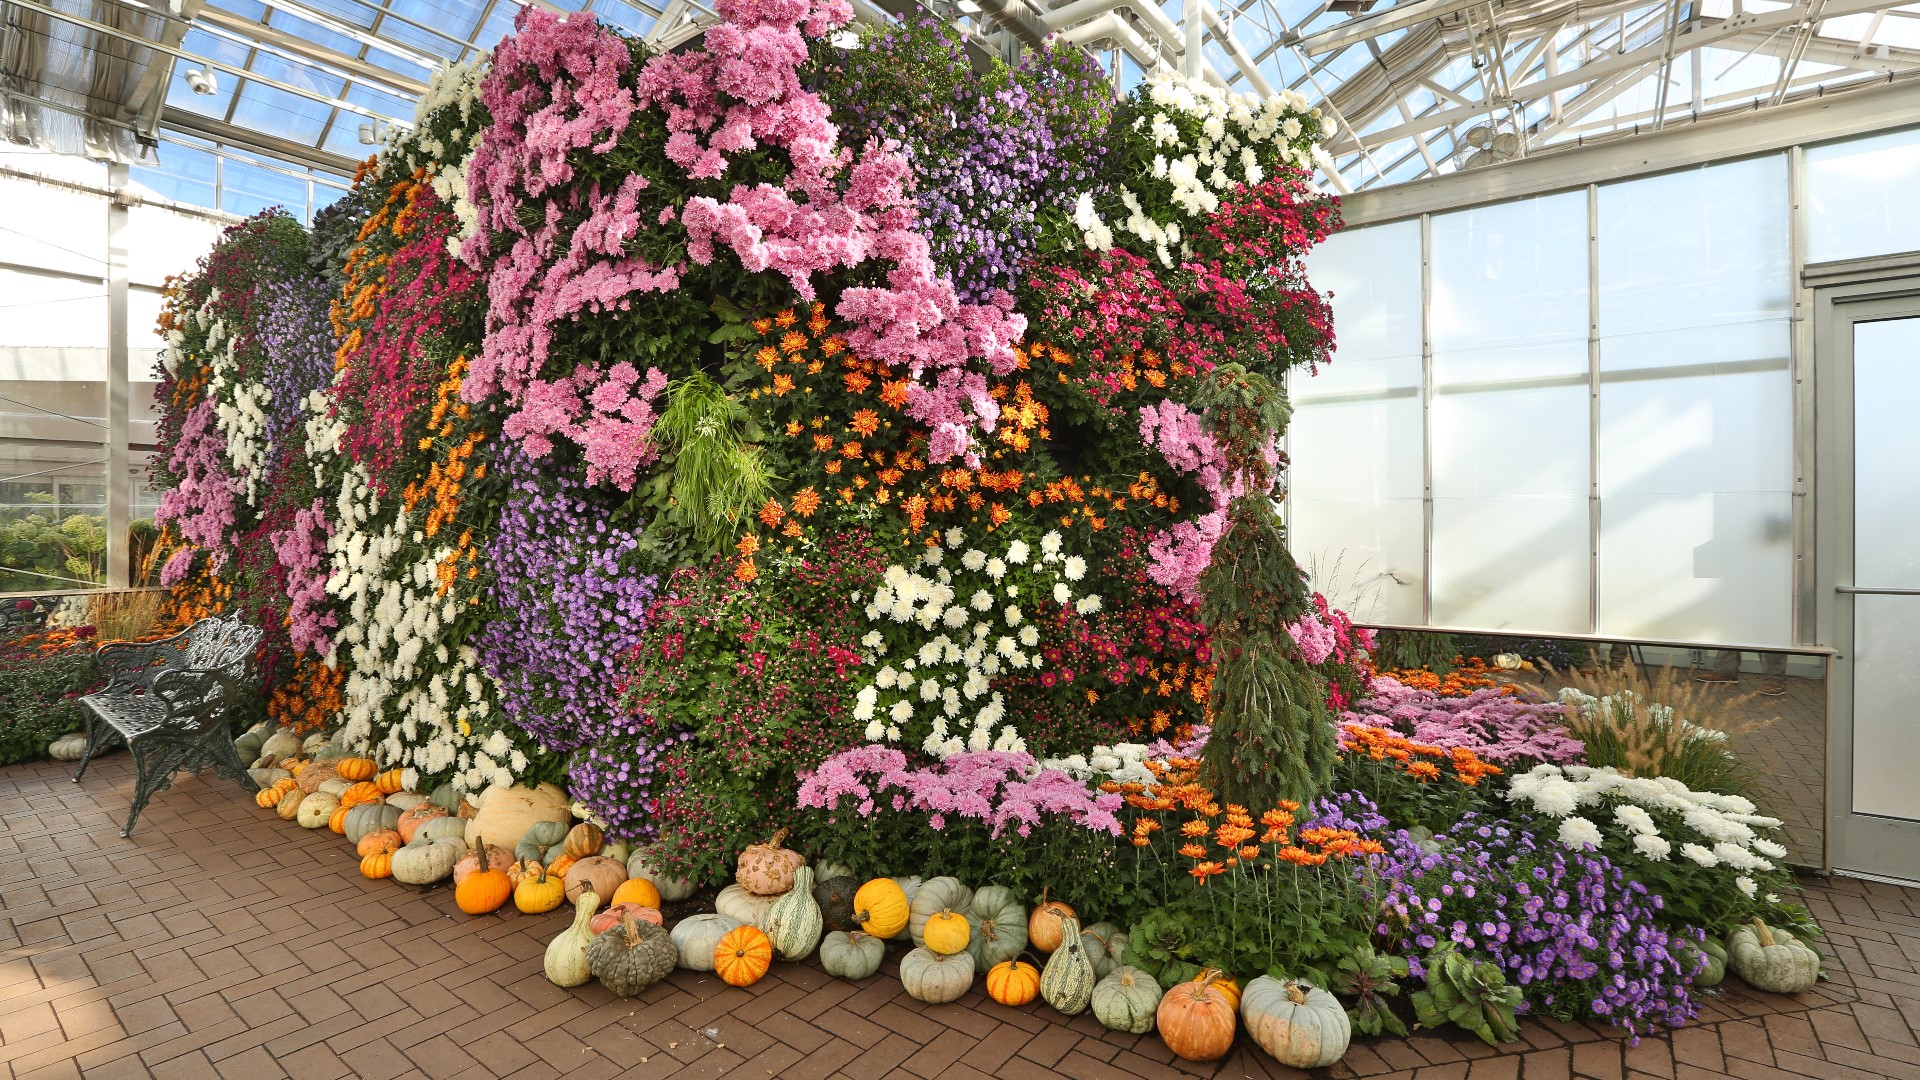 Frederik Meijer Gardens & Sculpture Park's 25th annual fall horticulture exhibition, "Chrysanthemums & More!" is back this September and October.